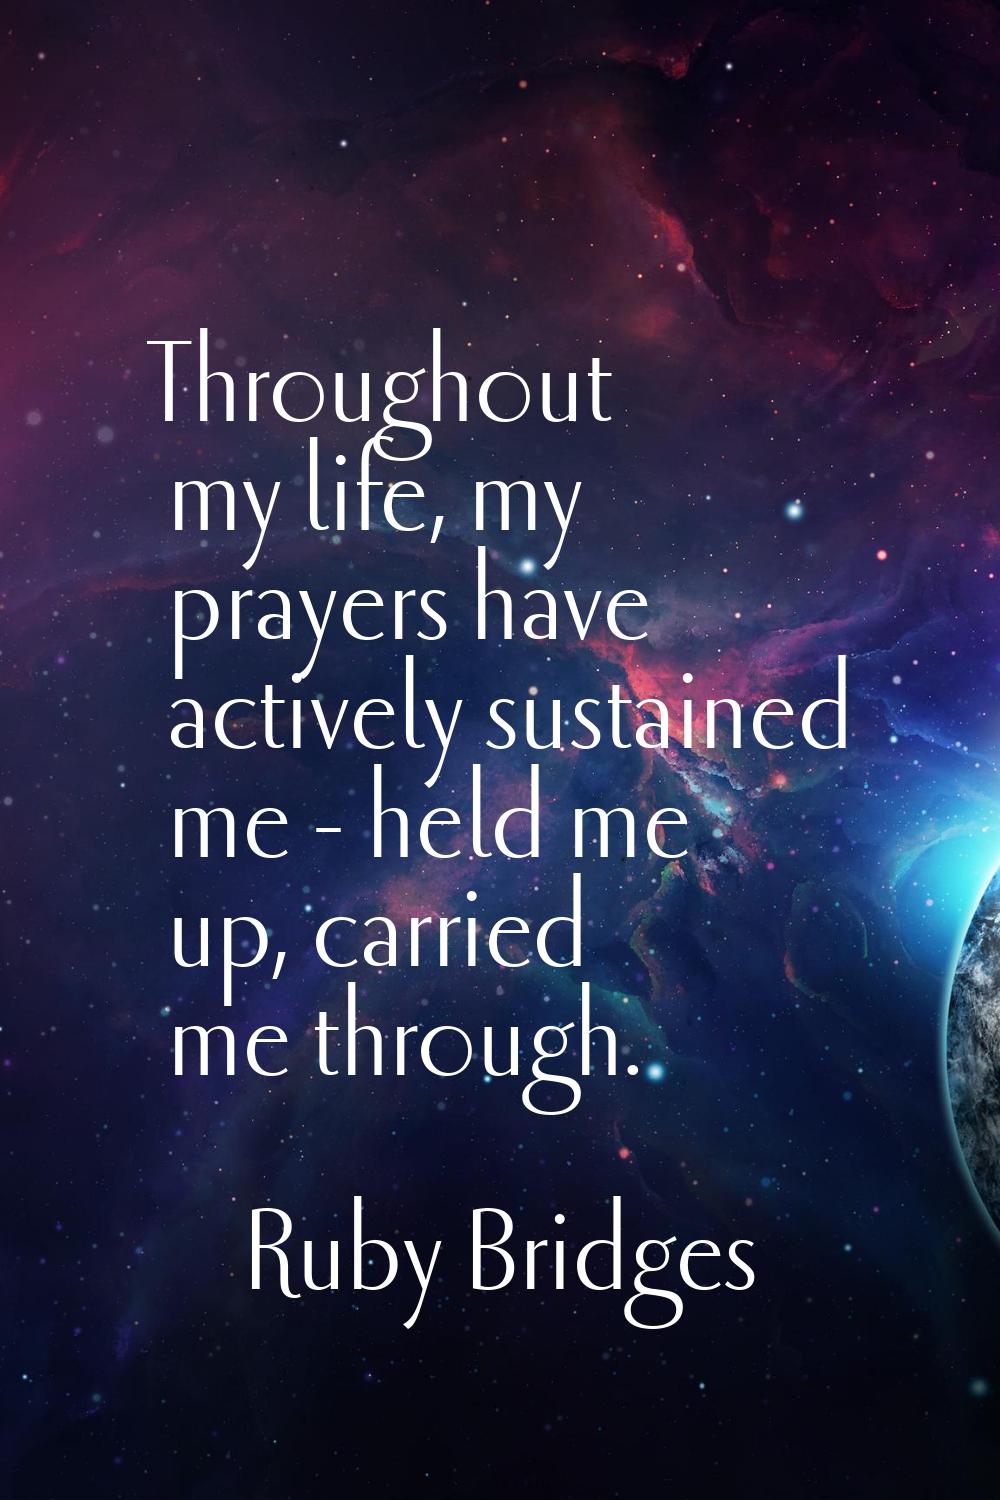 Throughout my life, my prayers have actively sustained me - held me up, carried me through.